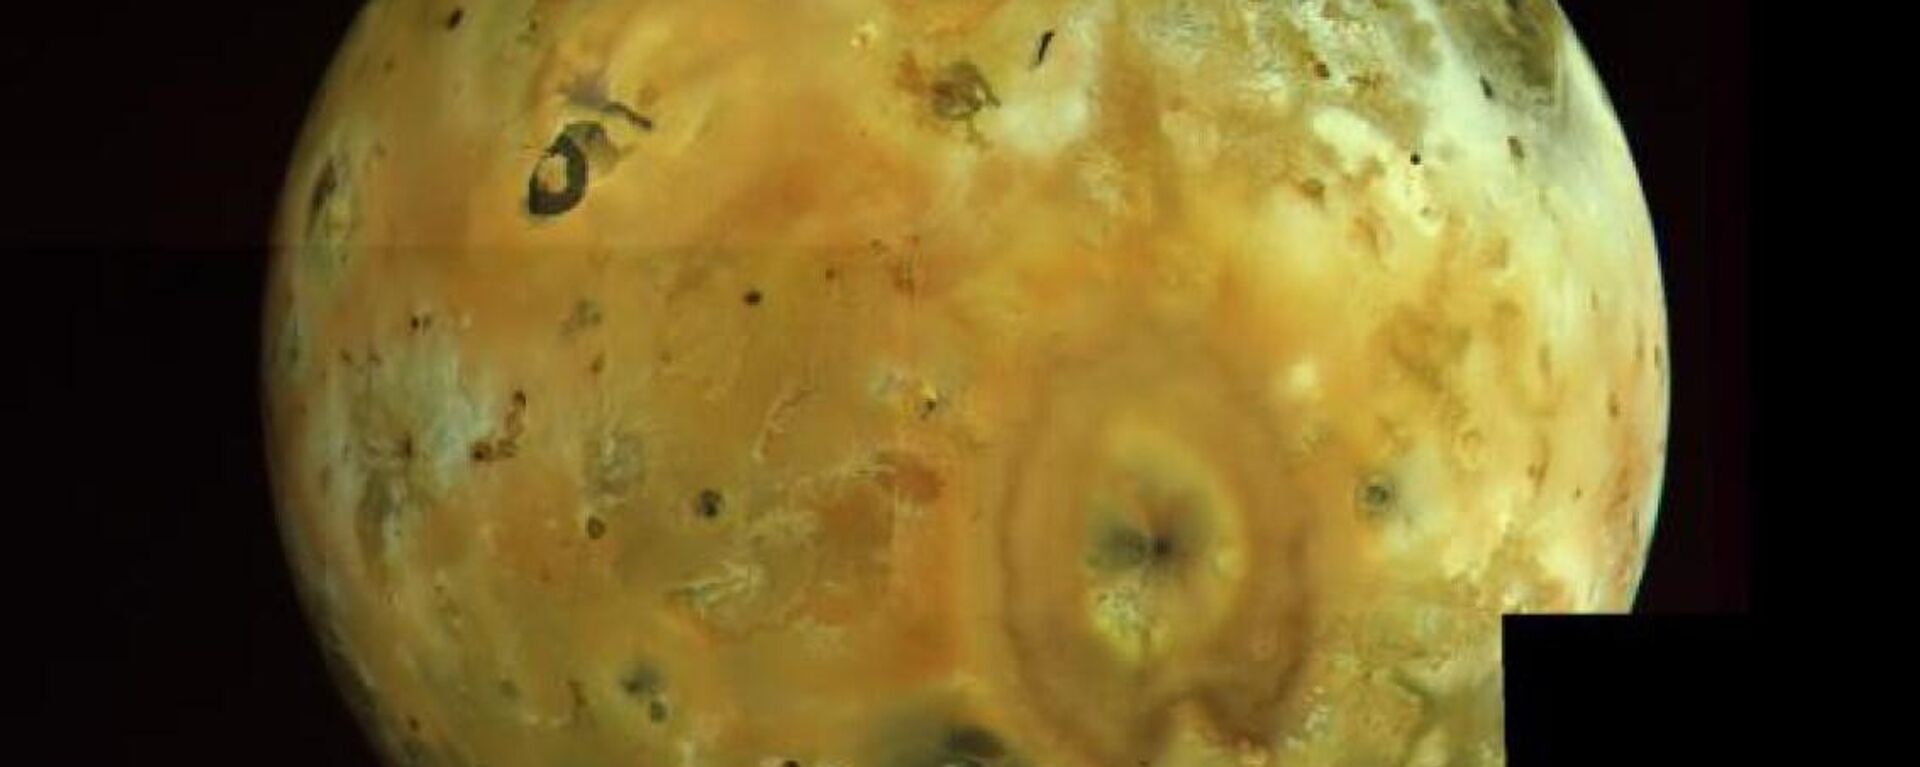 A mosaic of Jupiter's volcanic moon Io obtained by the Voyager 1 probe on March 5, 1979, at a range of 400,000 kilometers. - Sputnik International, 1920, 15.12.2022